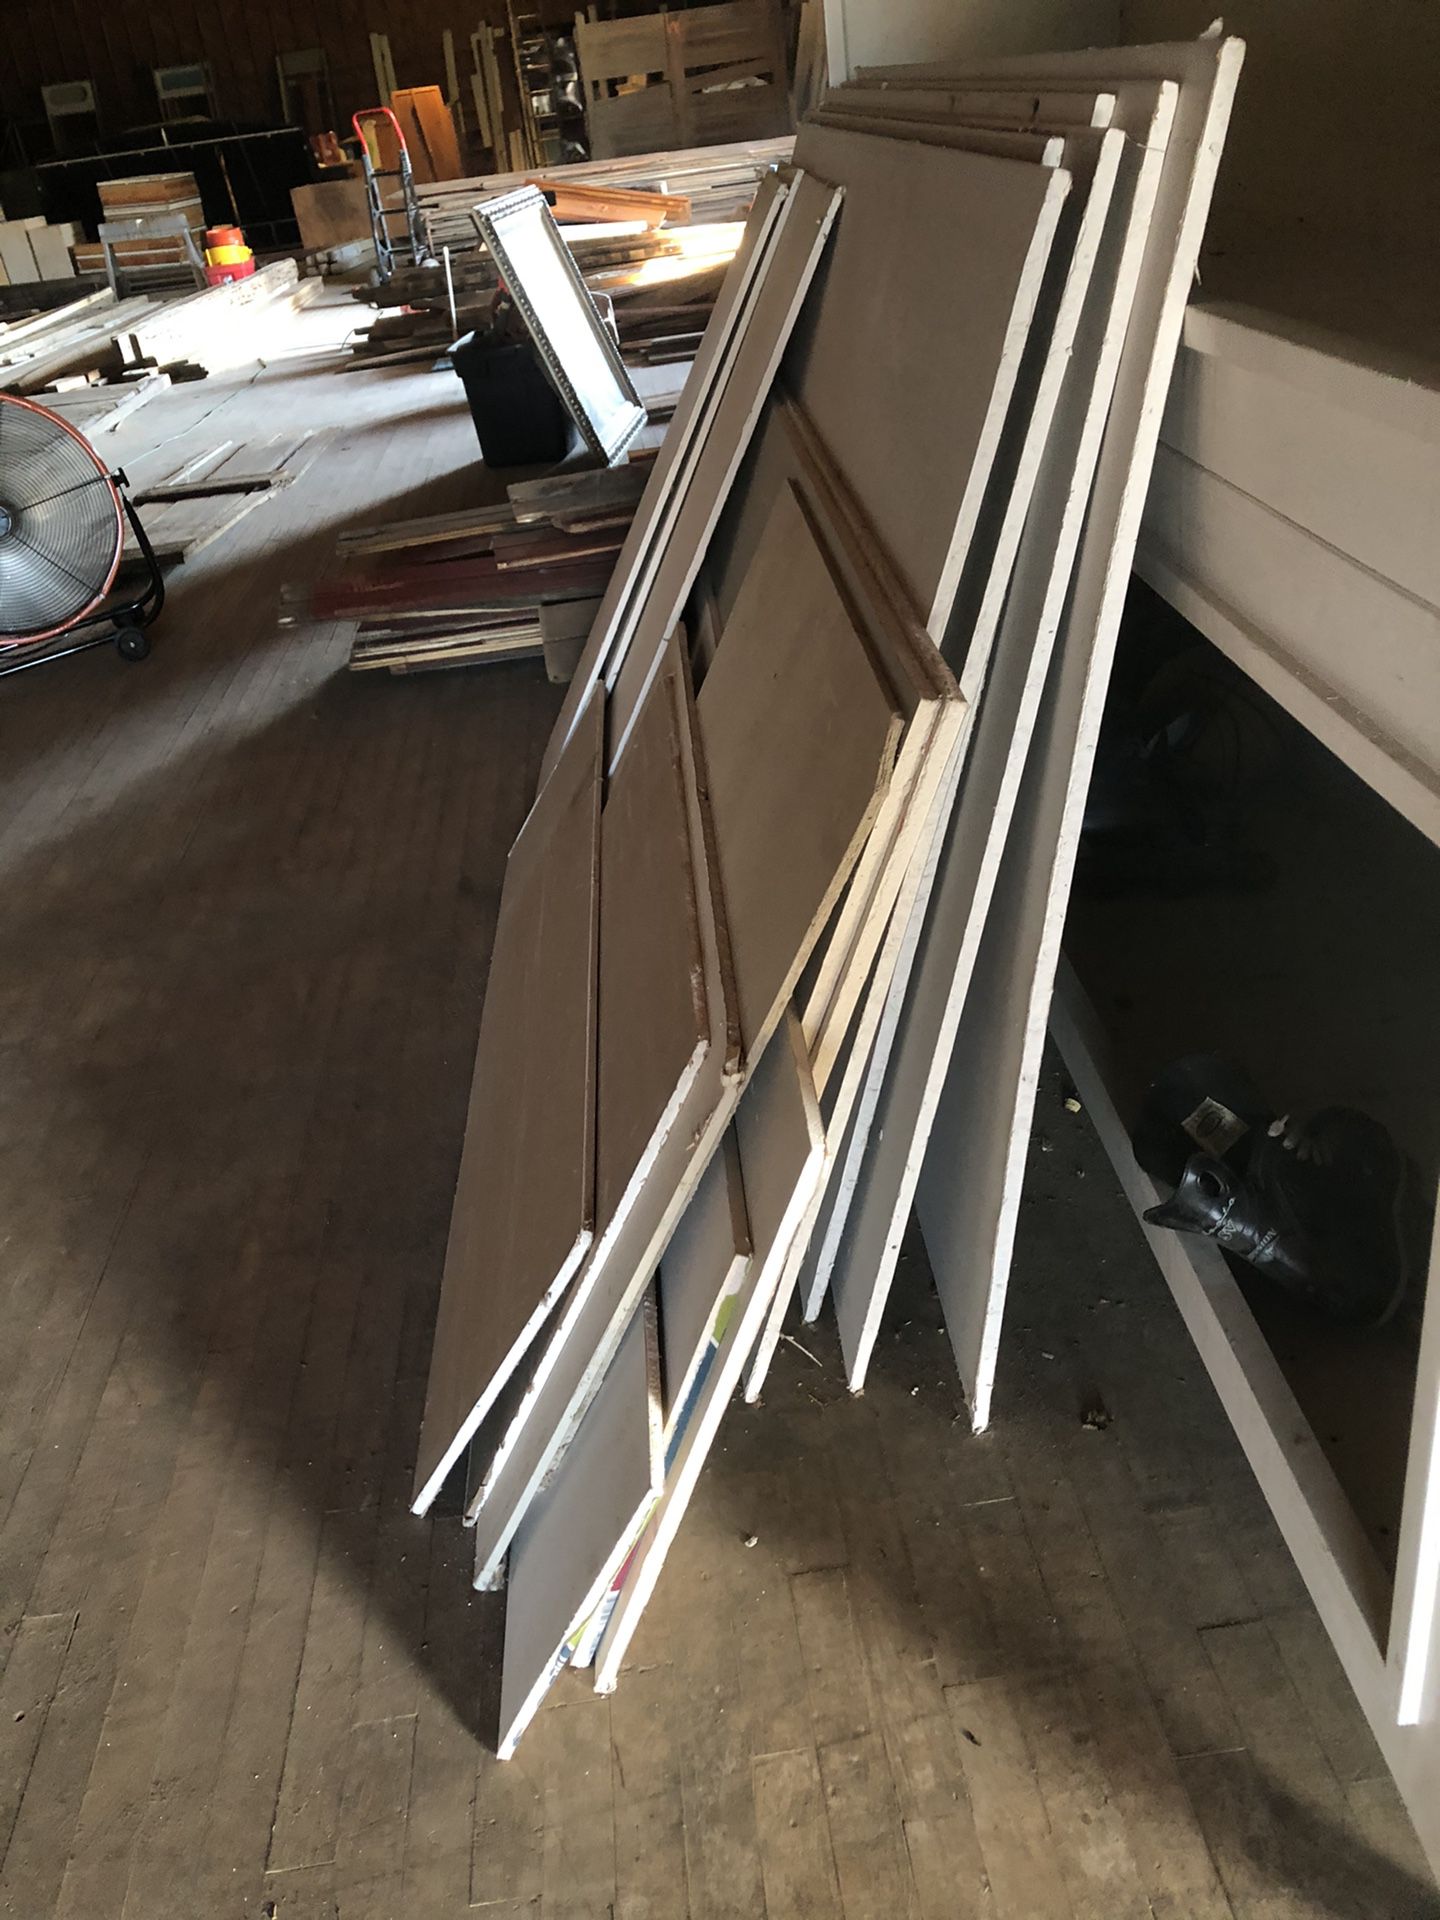 Free - Miscellaneous pieces of drywall